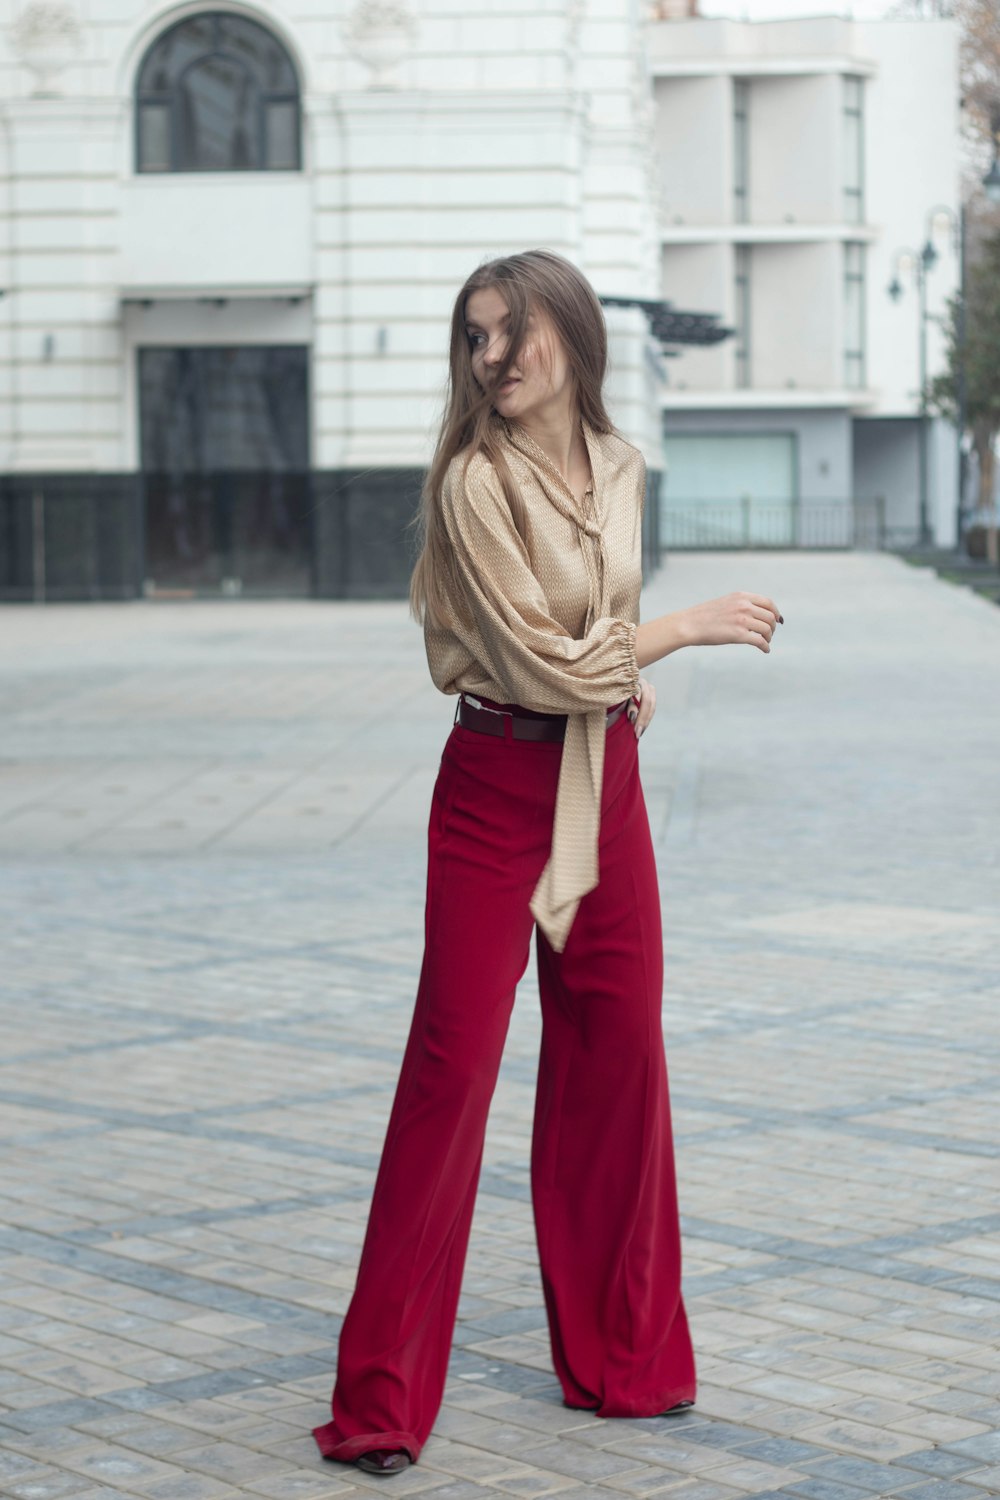 a woman in a brown shirt and red pants